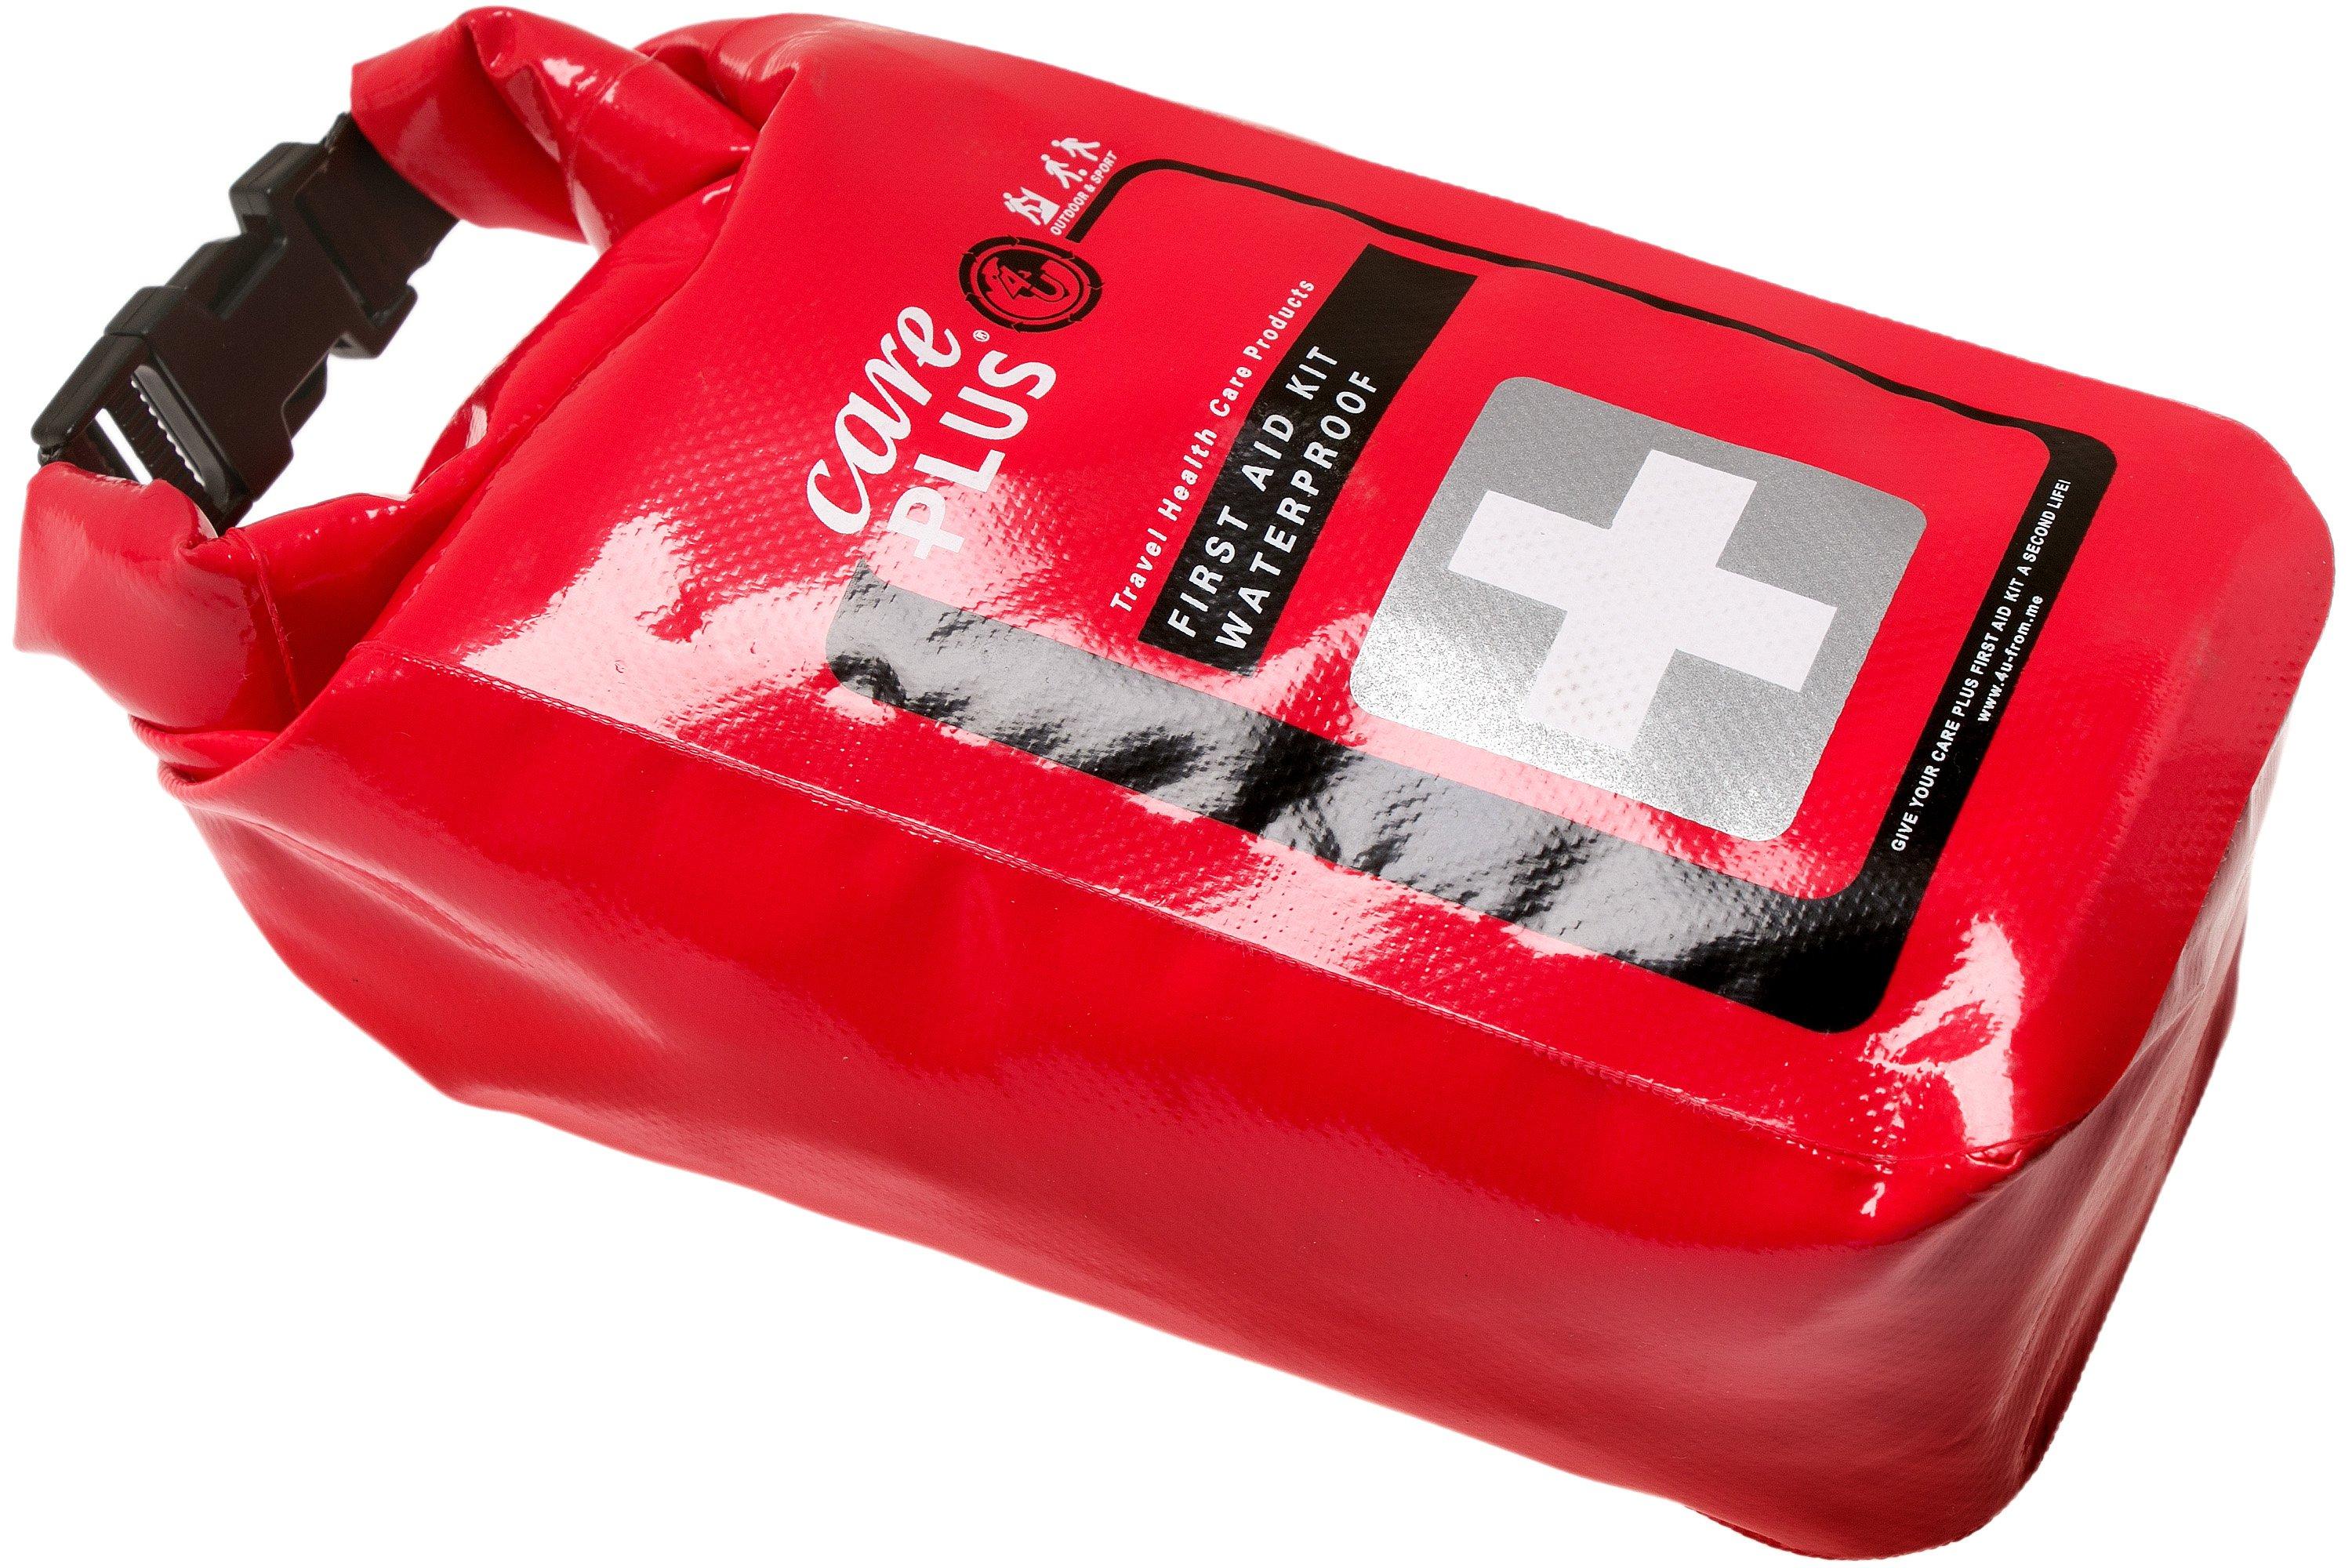 Care Plus First Kit first aid kit in waterproof pouch shopping at Knivesandtools.com